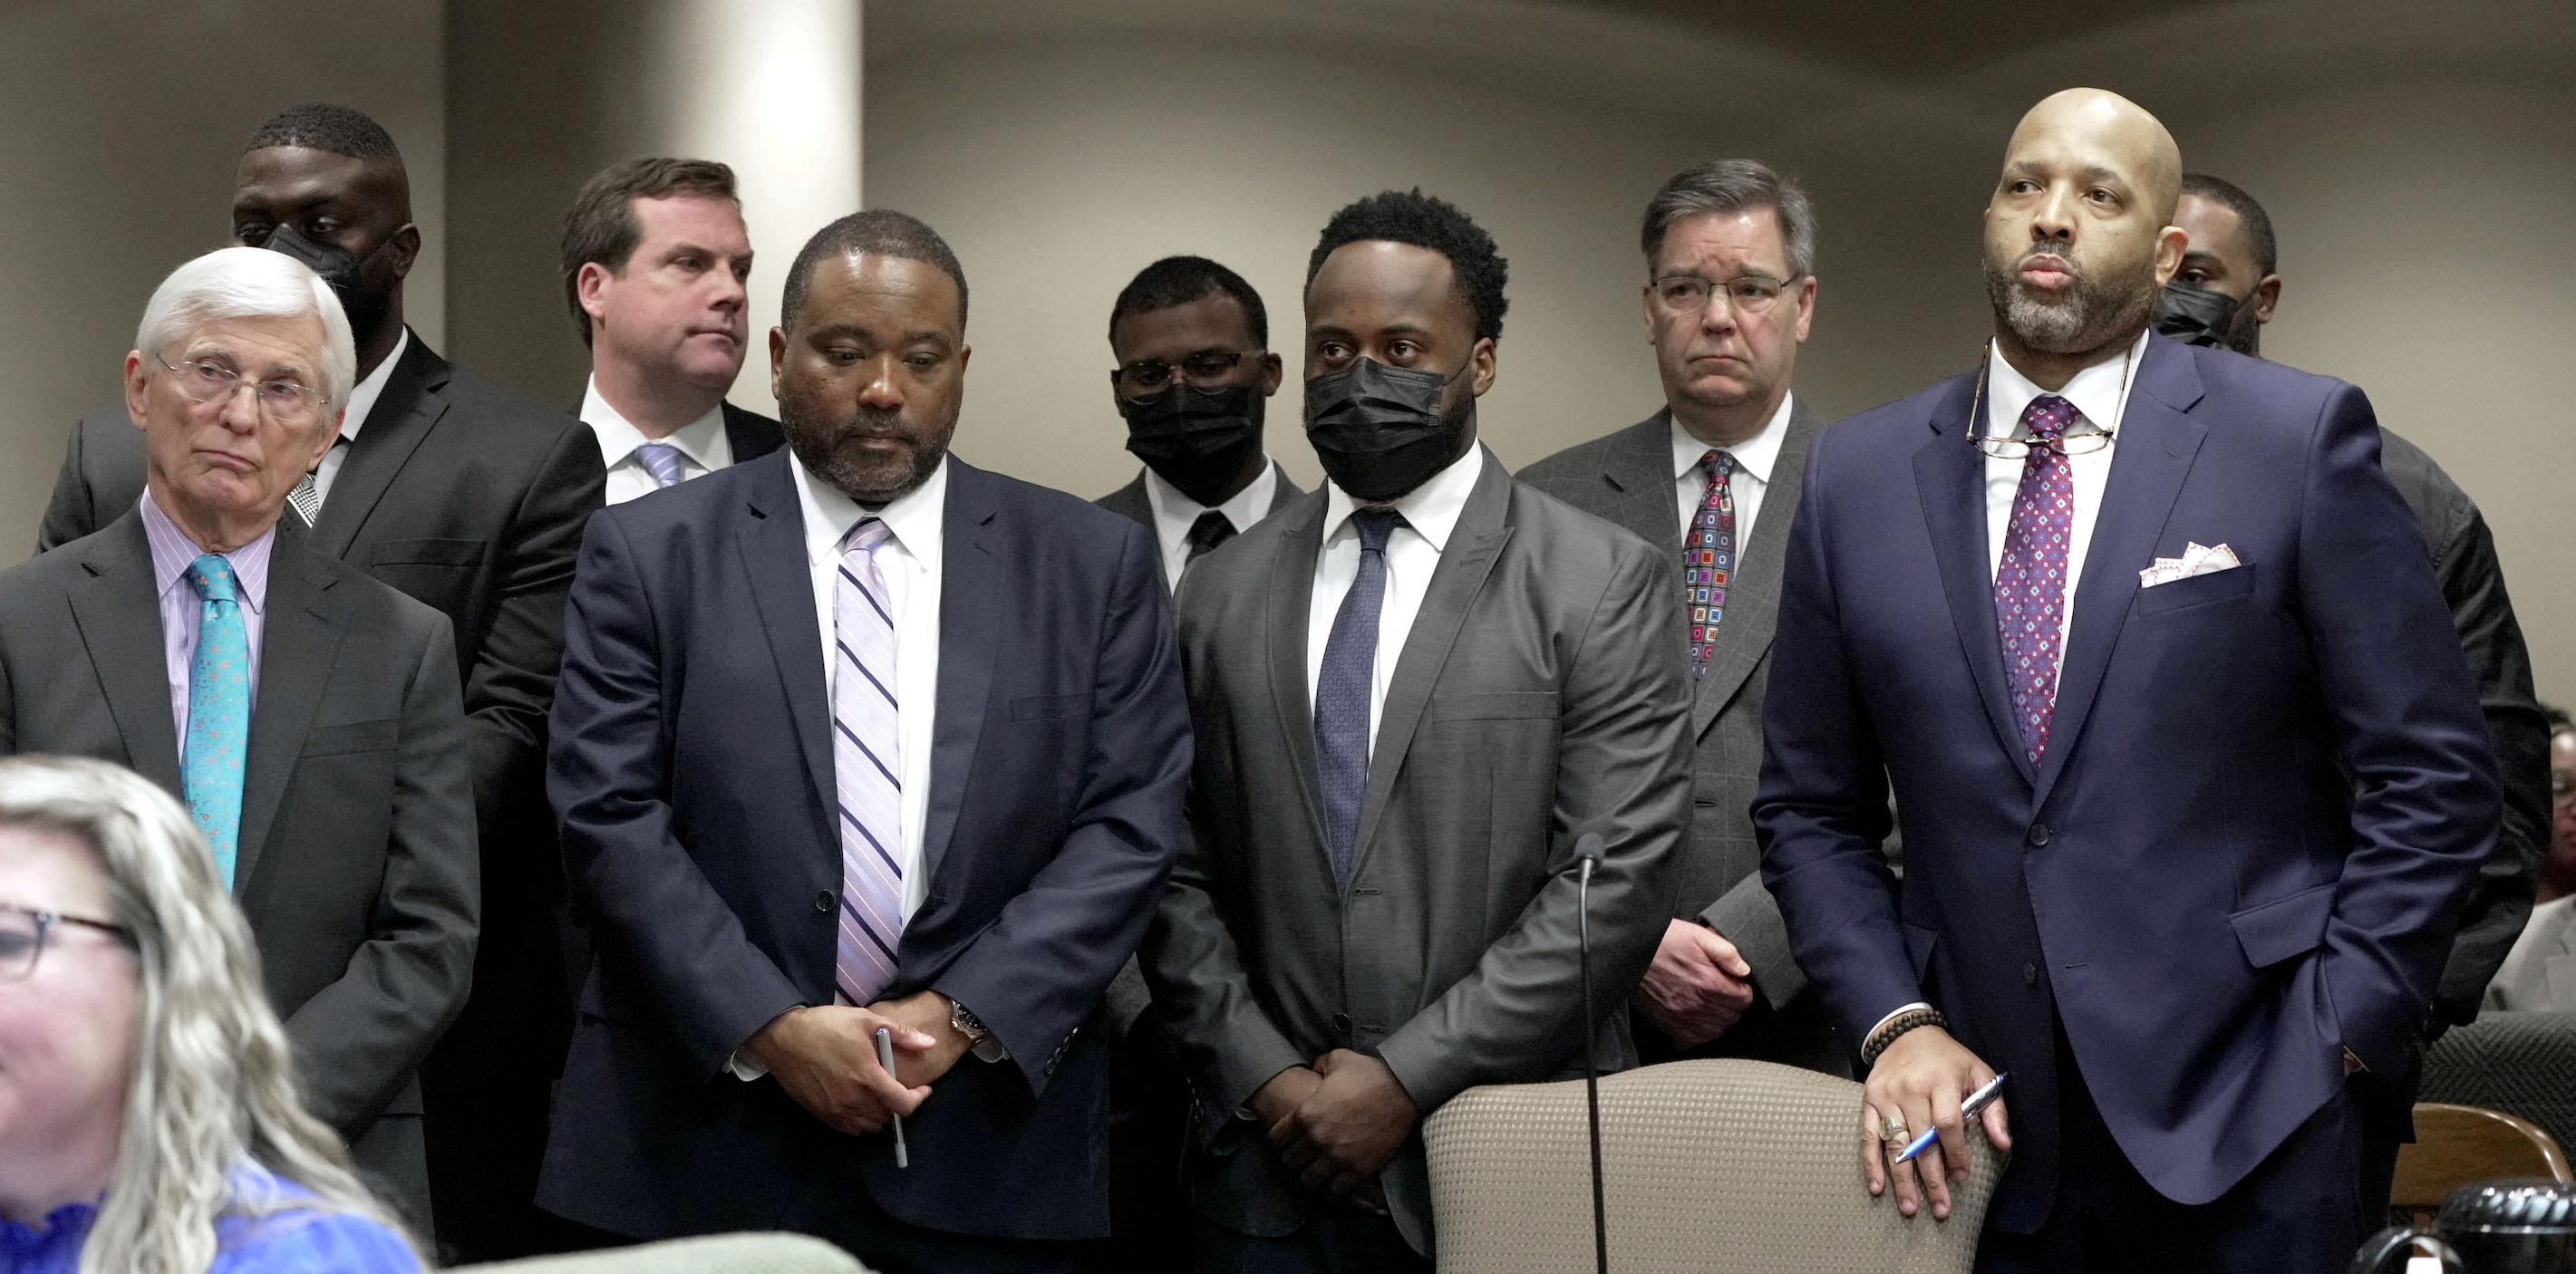 Five ex-Memphis policemen charged with civil rights violations in Tyre Nichols death